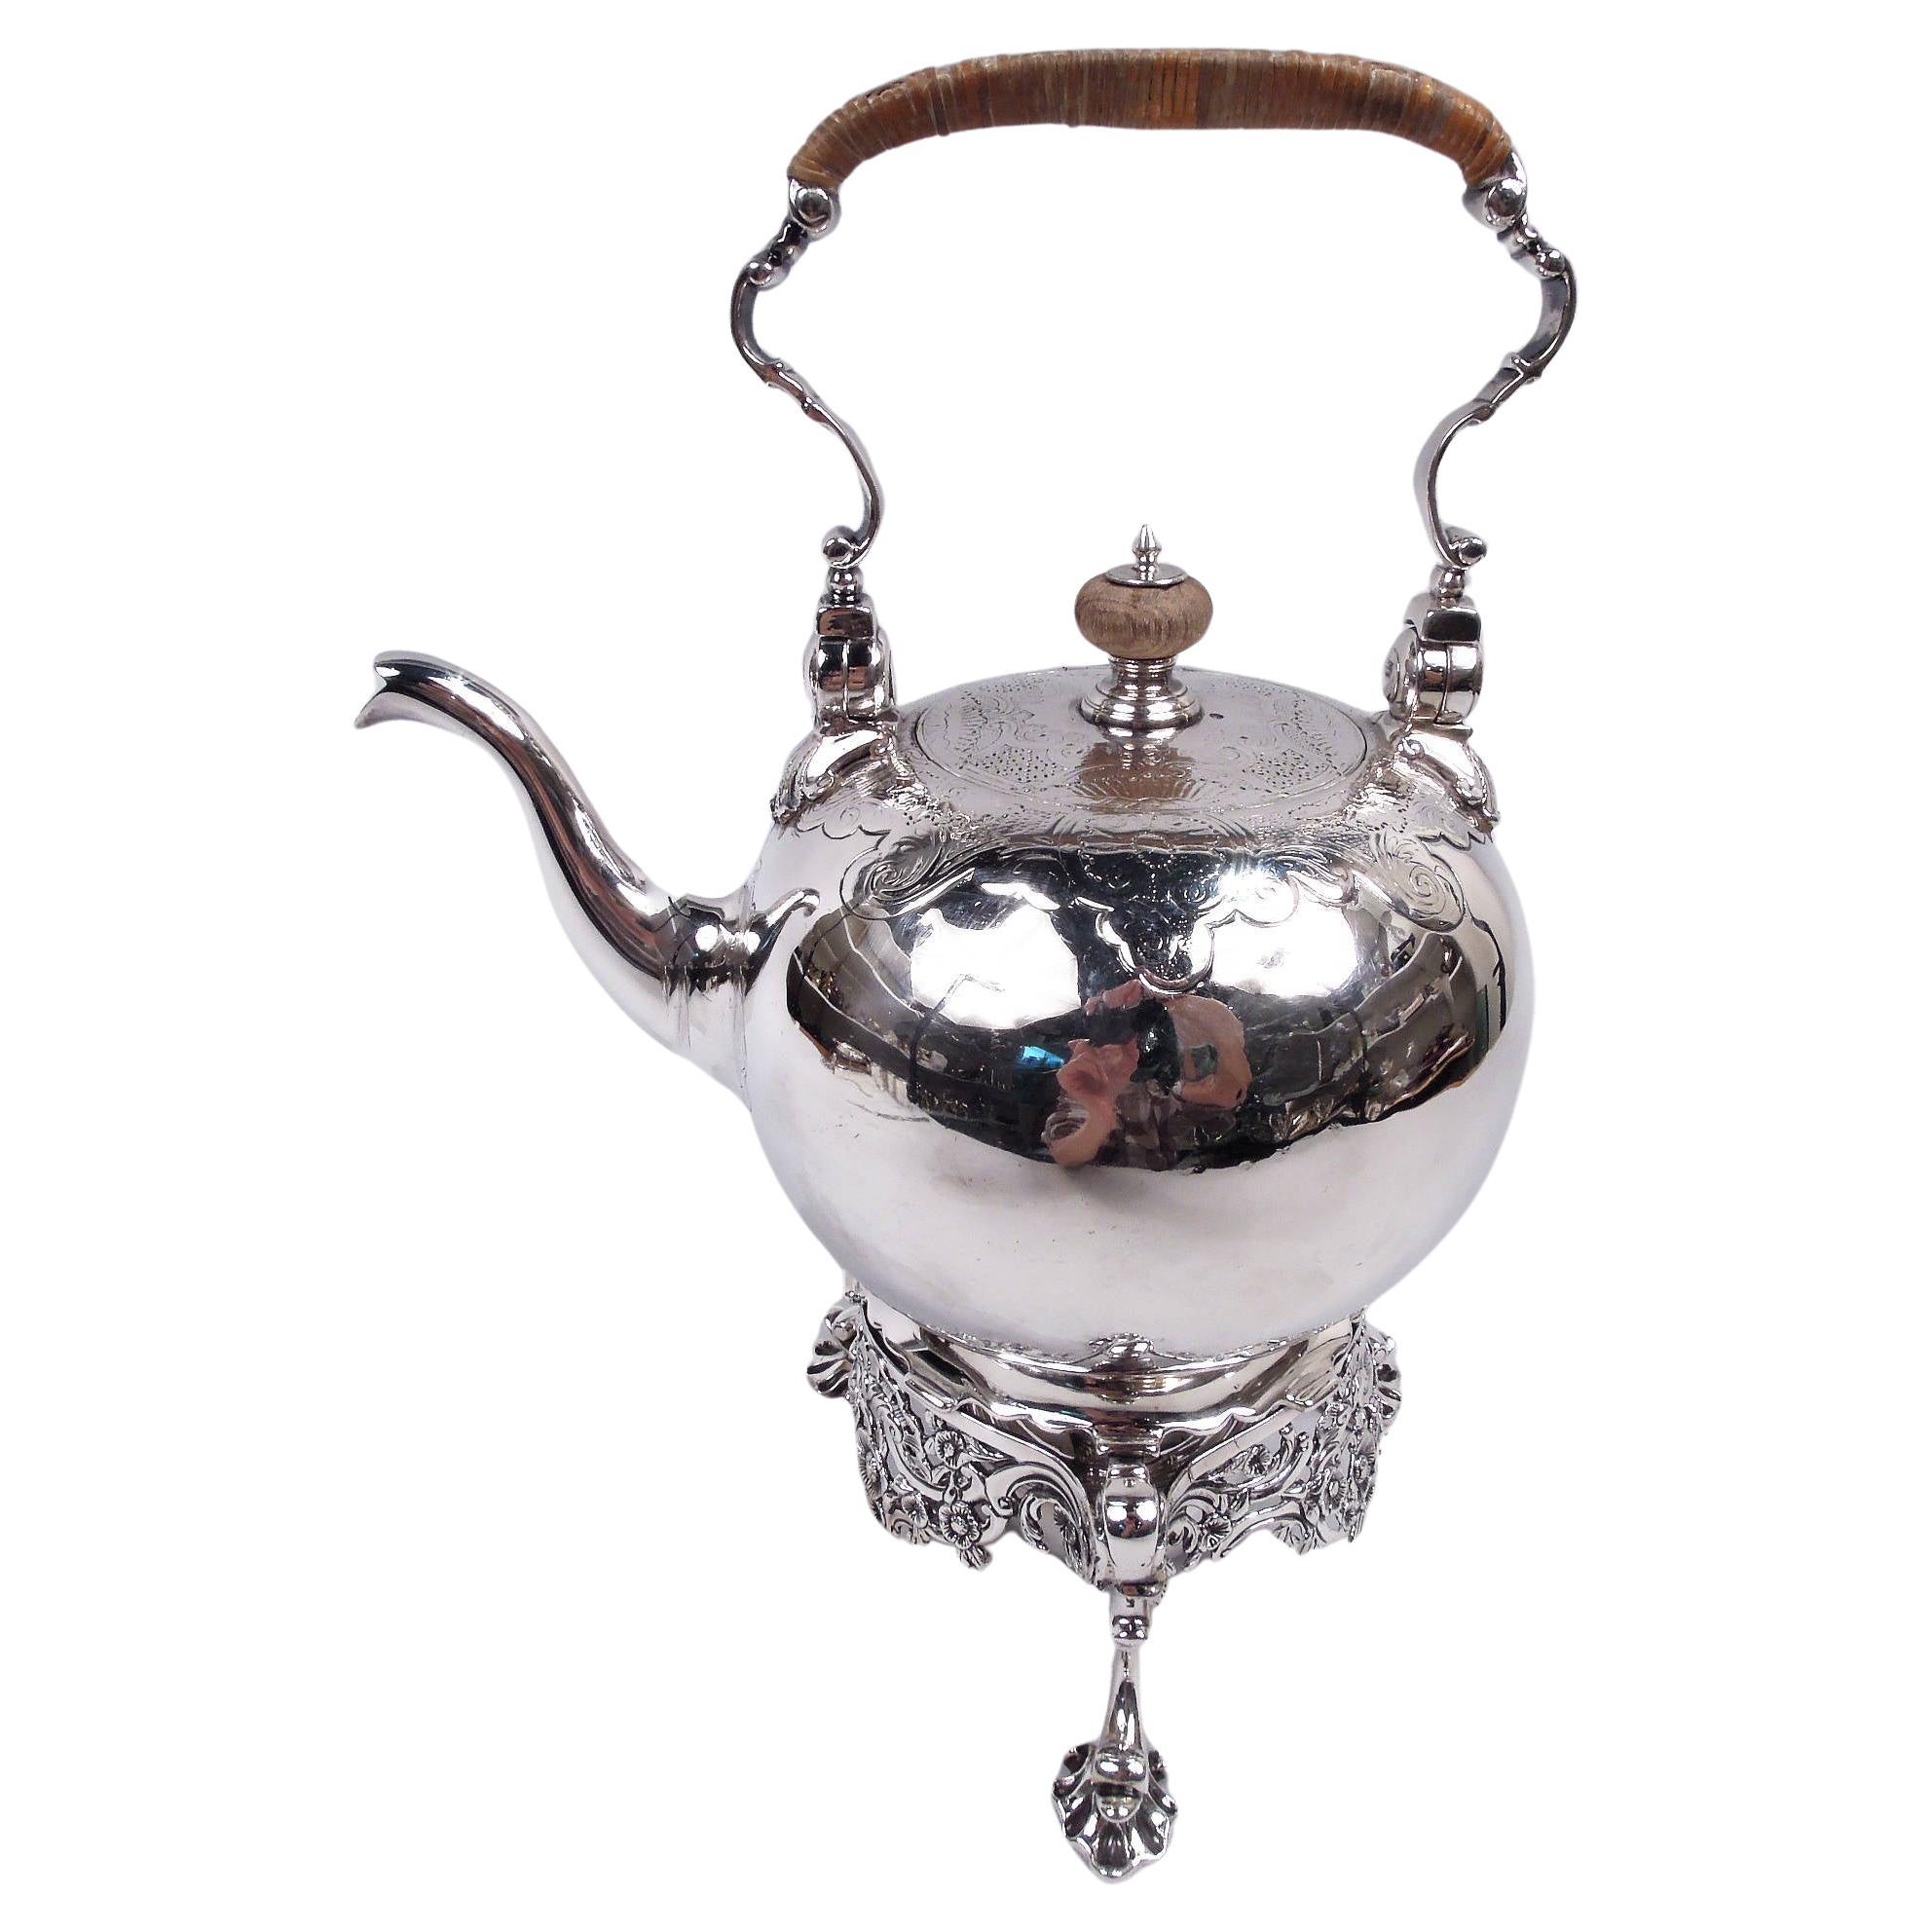 Antique English Georgian Sterling Silver Kettle on Stand